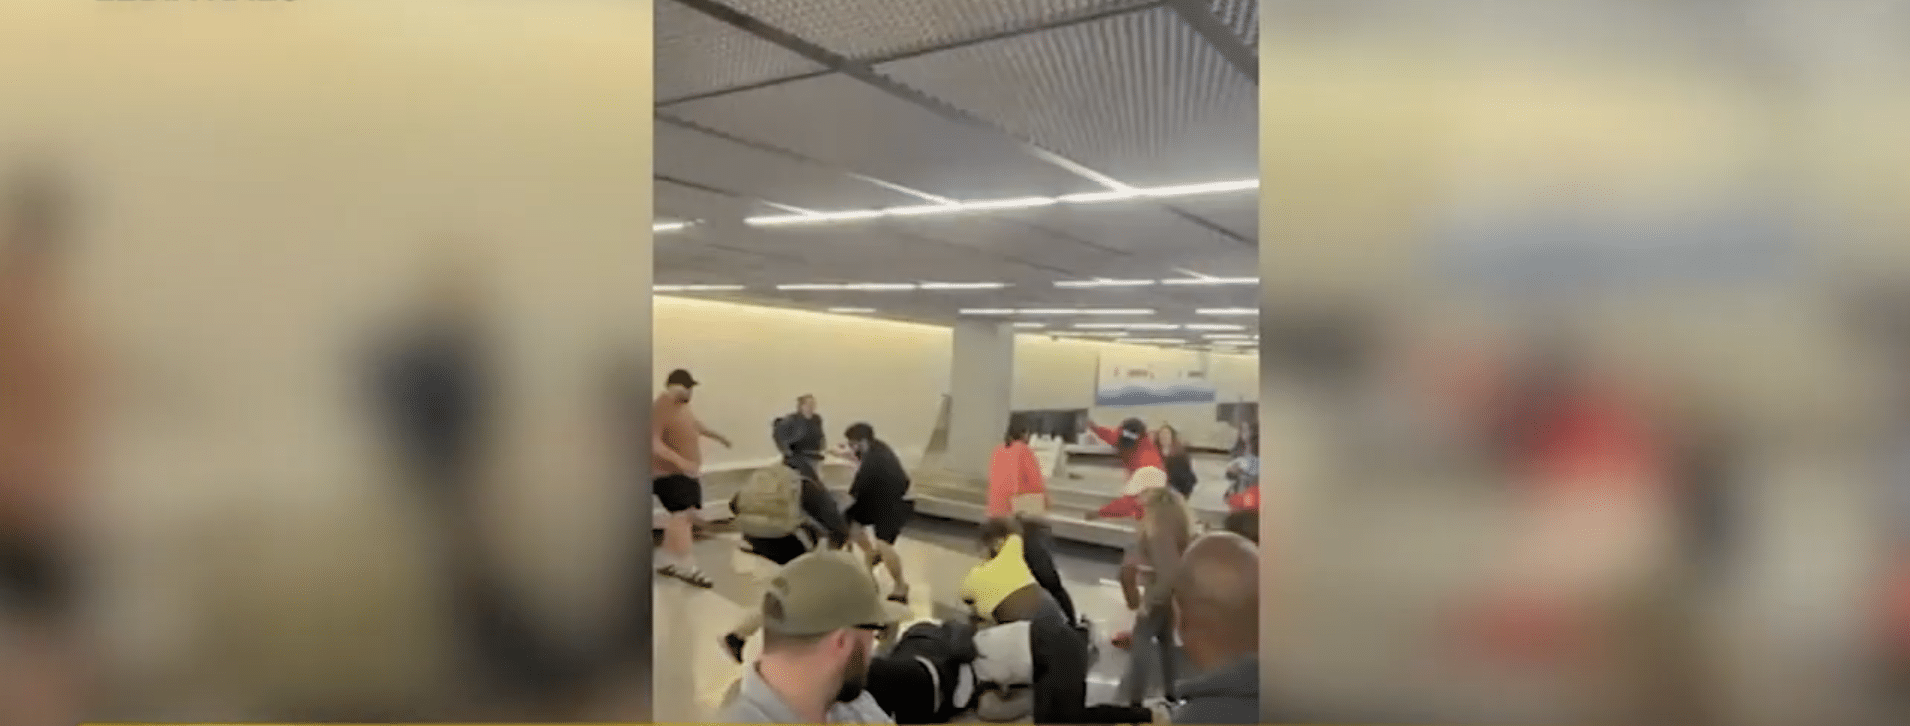 (WATCH) Massive brawl breaks out at Chicago airport baggage claim as travelers yank hair and land blows